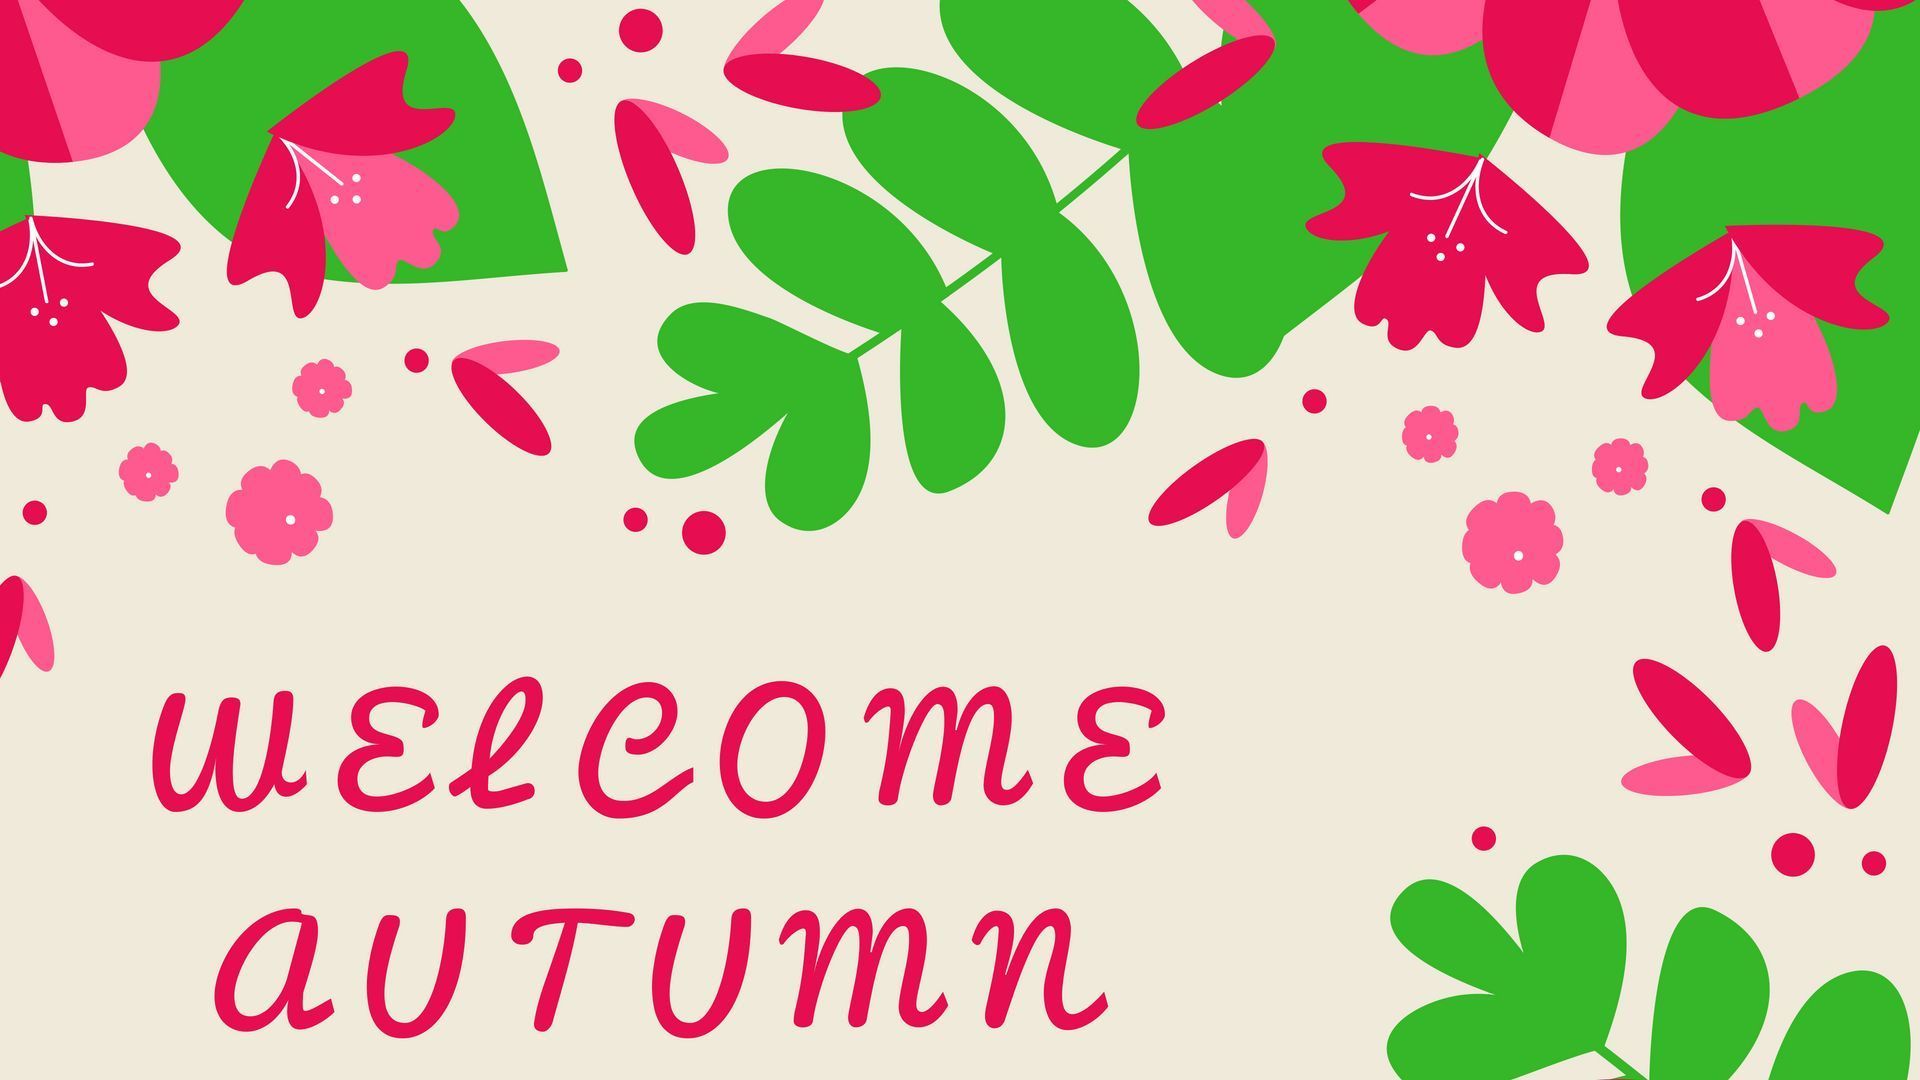 welcome autumn wallpaper. Welcome september image, Welcome image